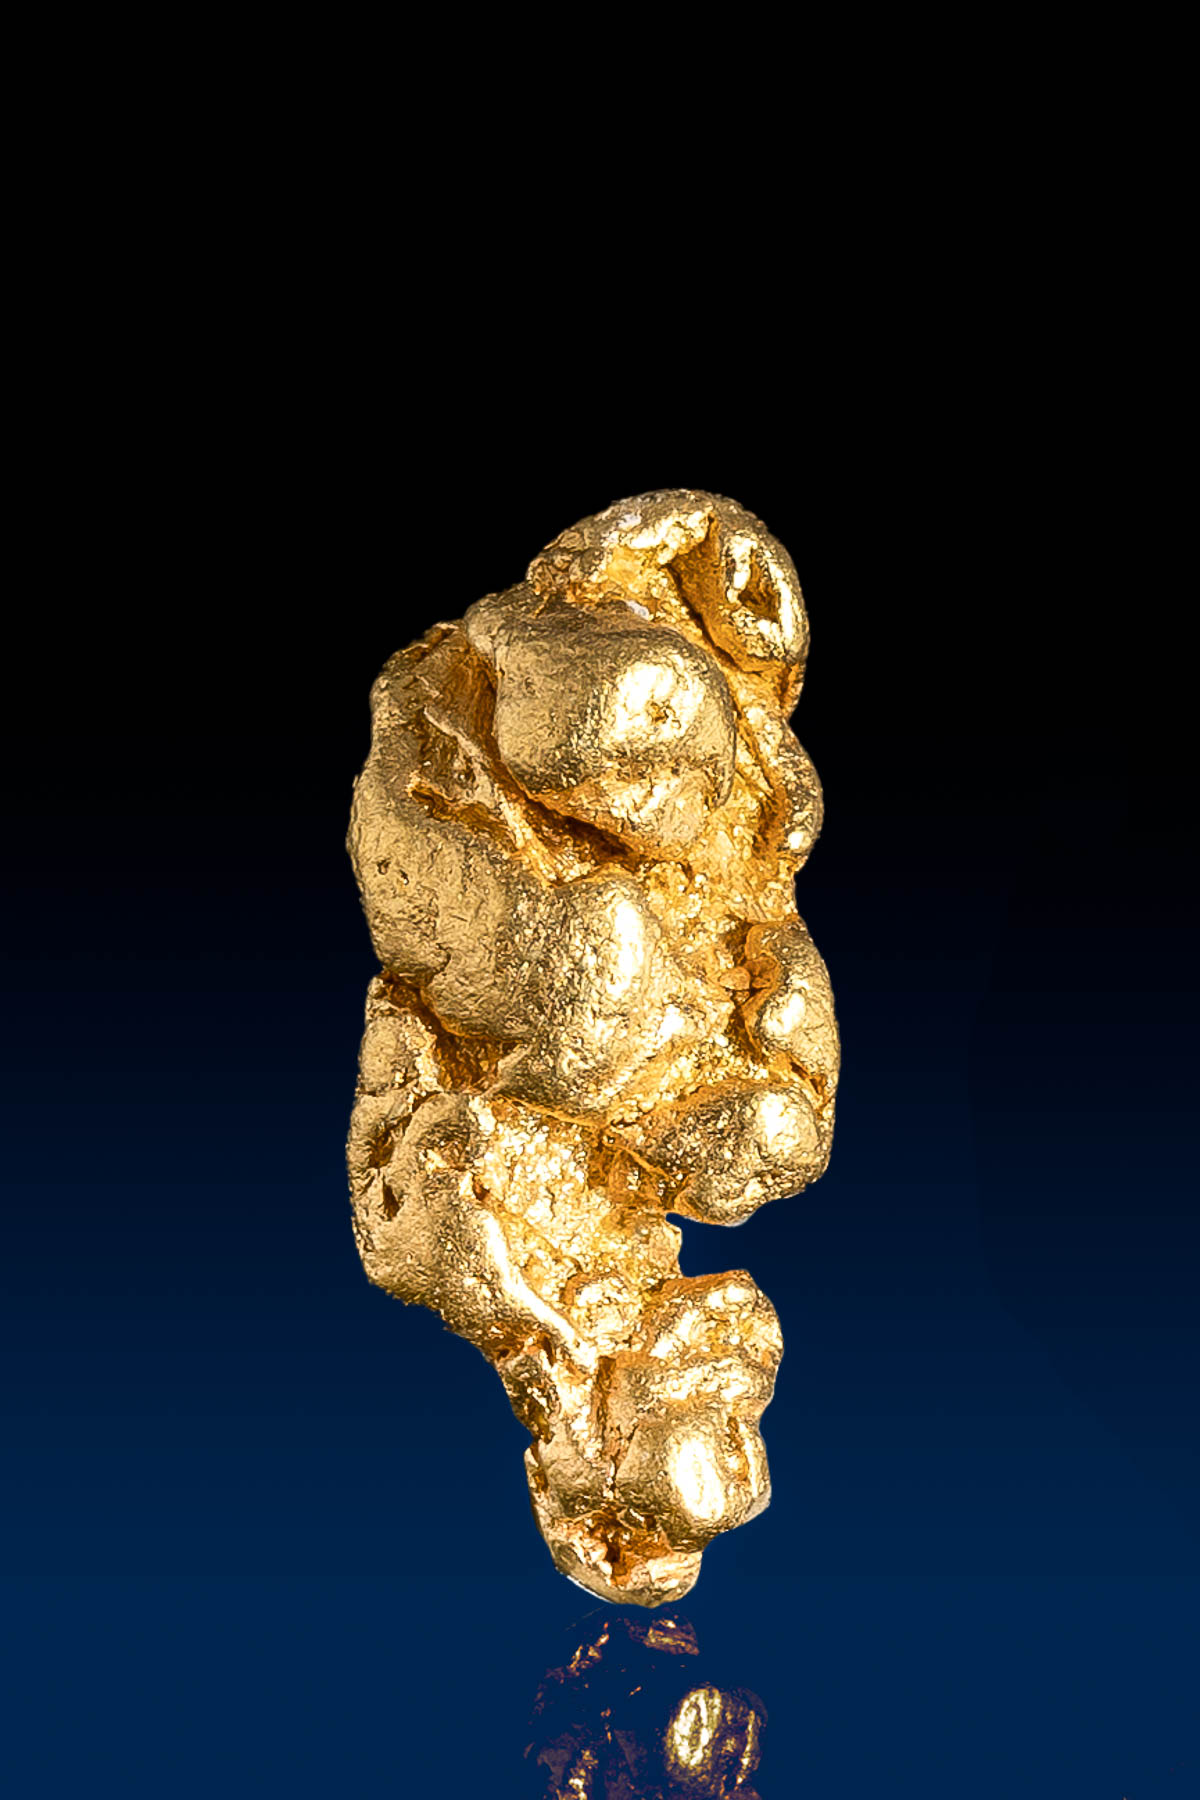 Long Rounded Eroded Crystal Gold nugget from Alaska - 2021